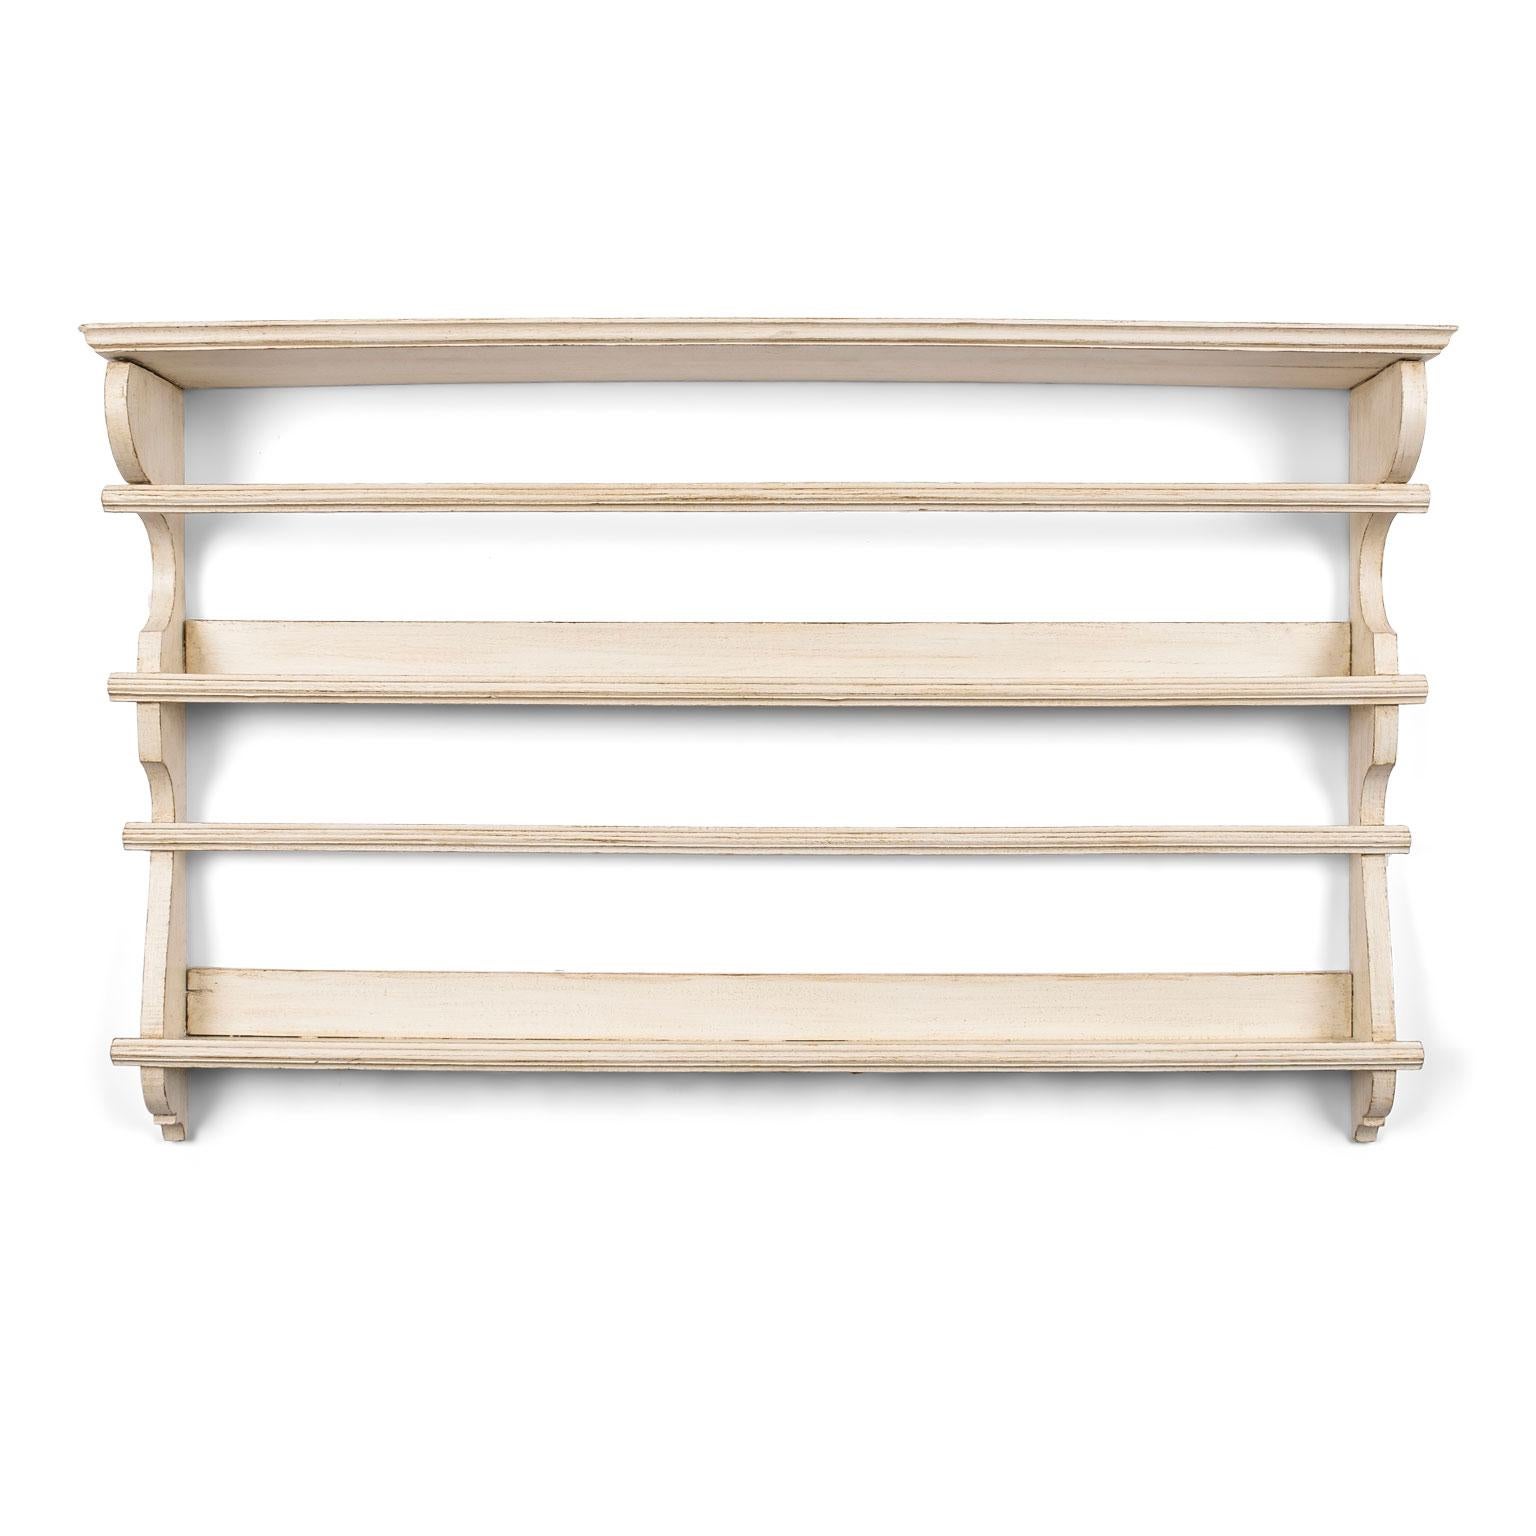 19th Century Cream Painted French Plate Rack